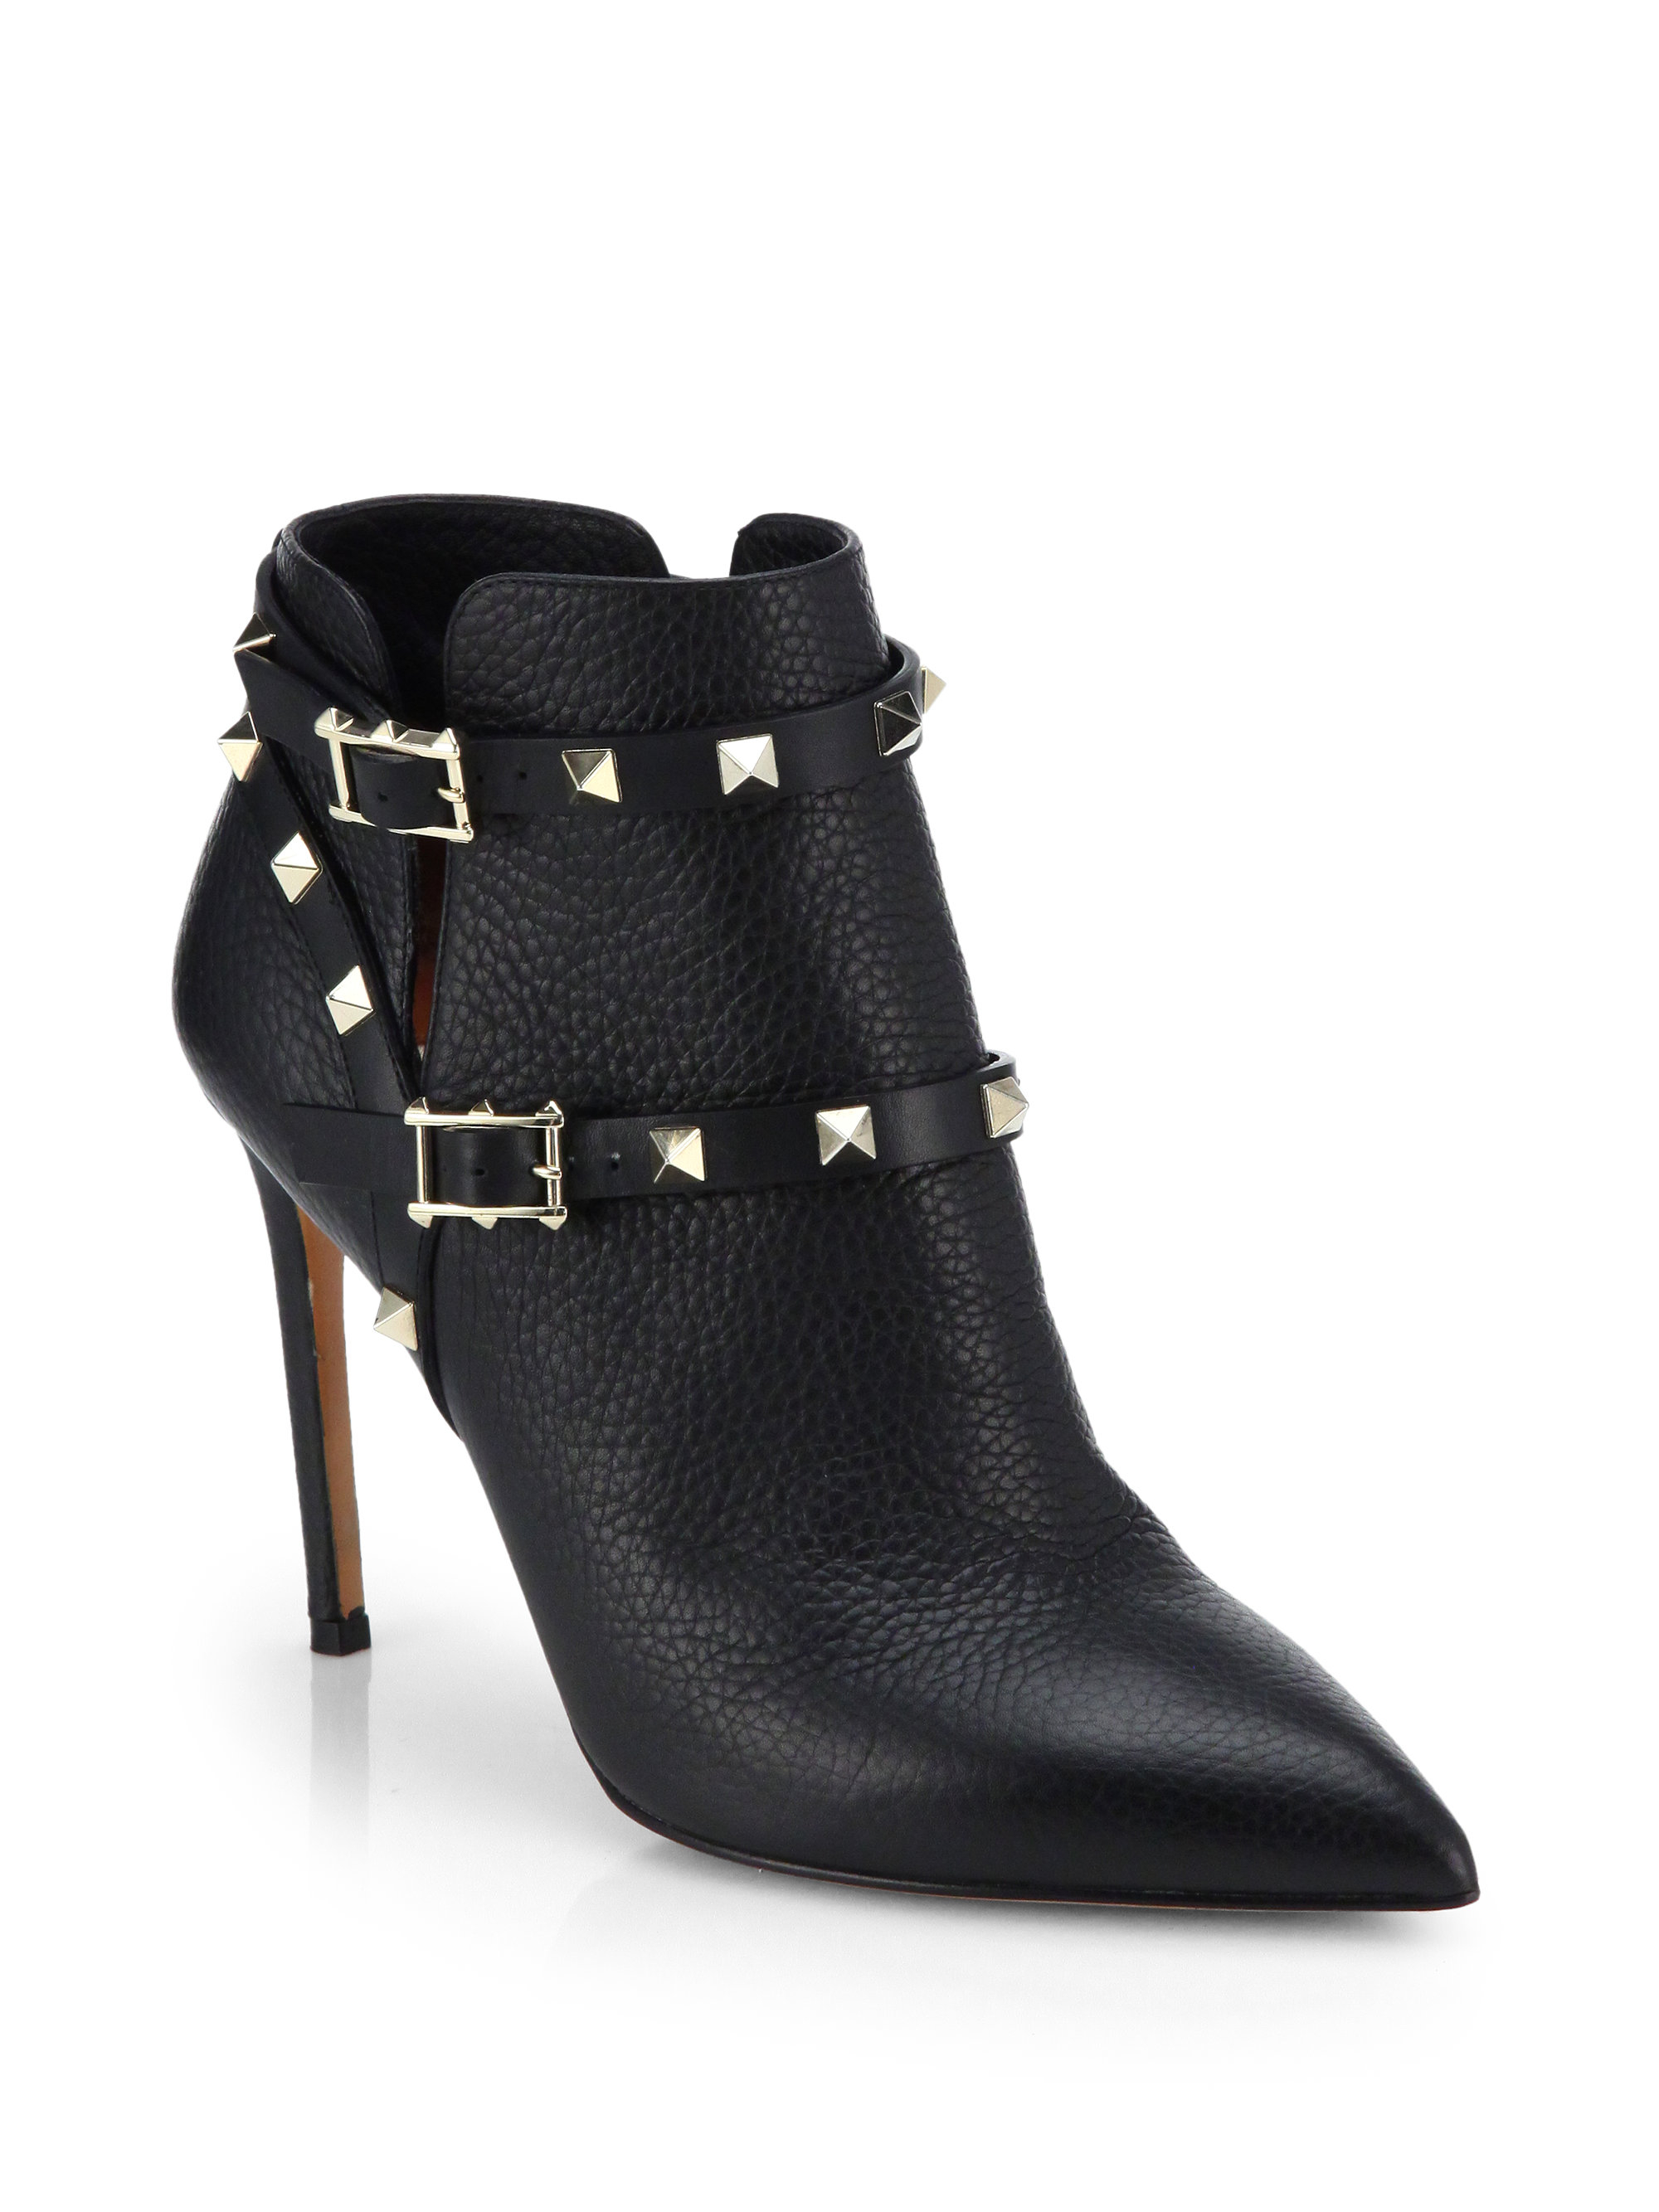 Valentino Rockstud Suede Ankle Boots in Black | Lyst